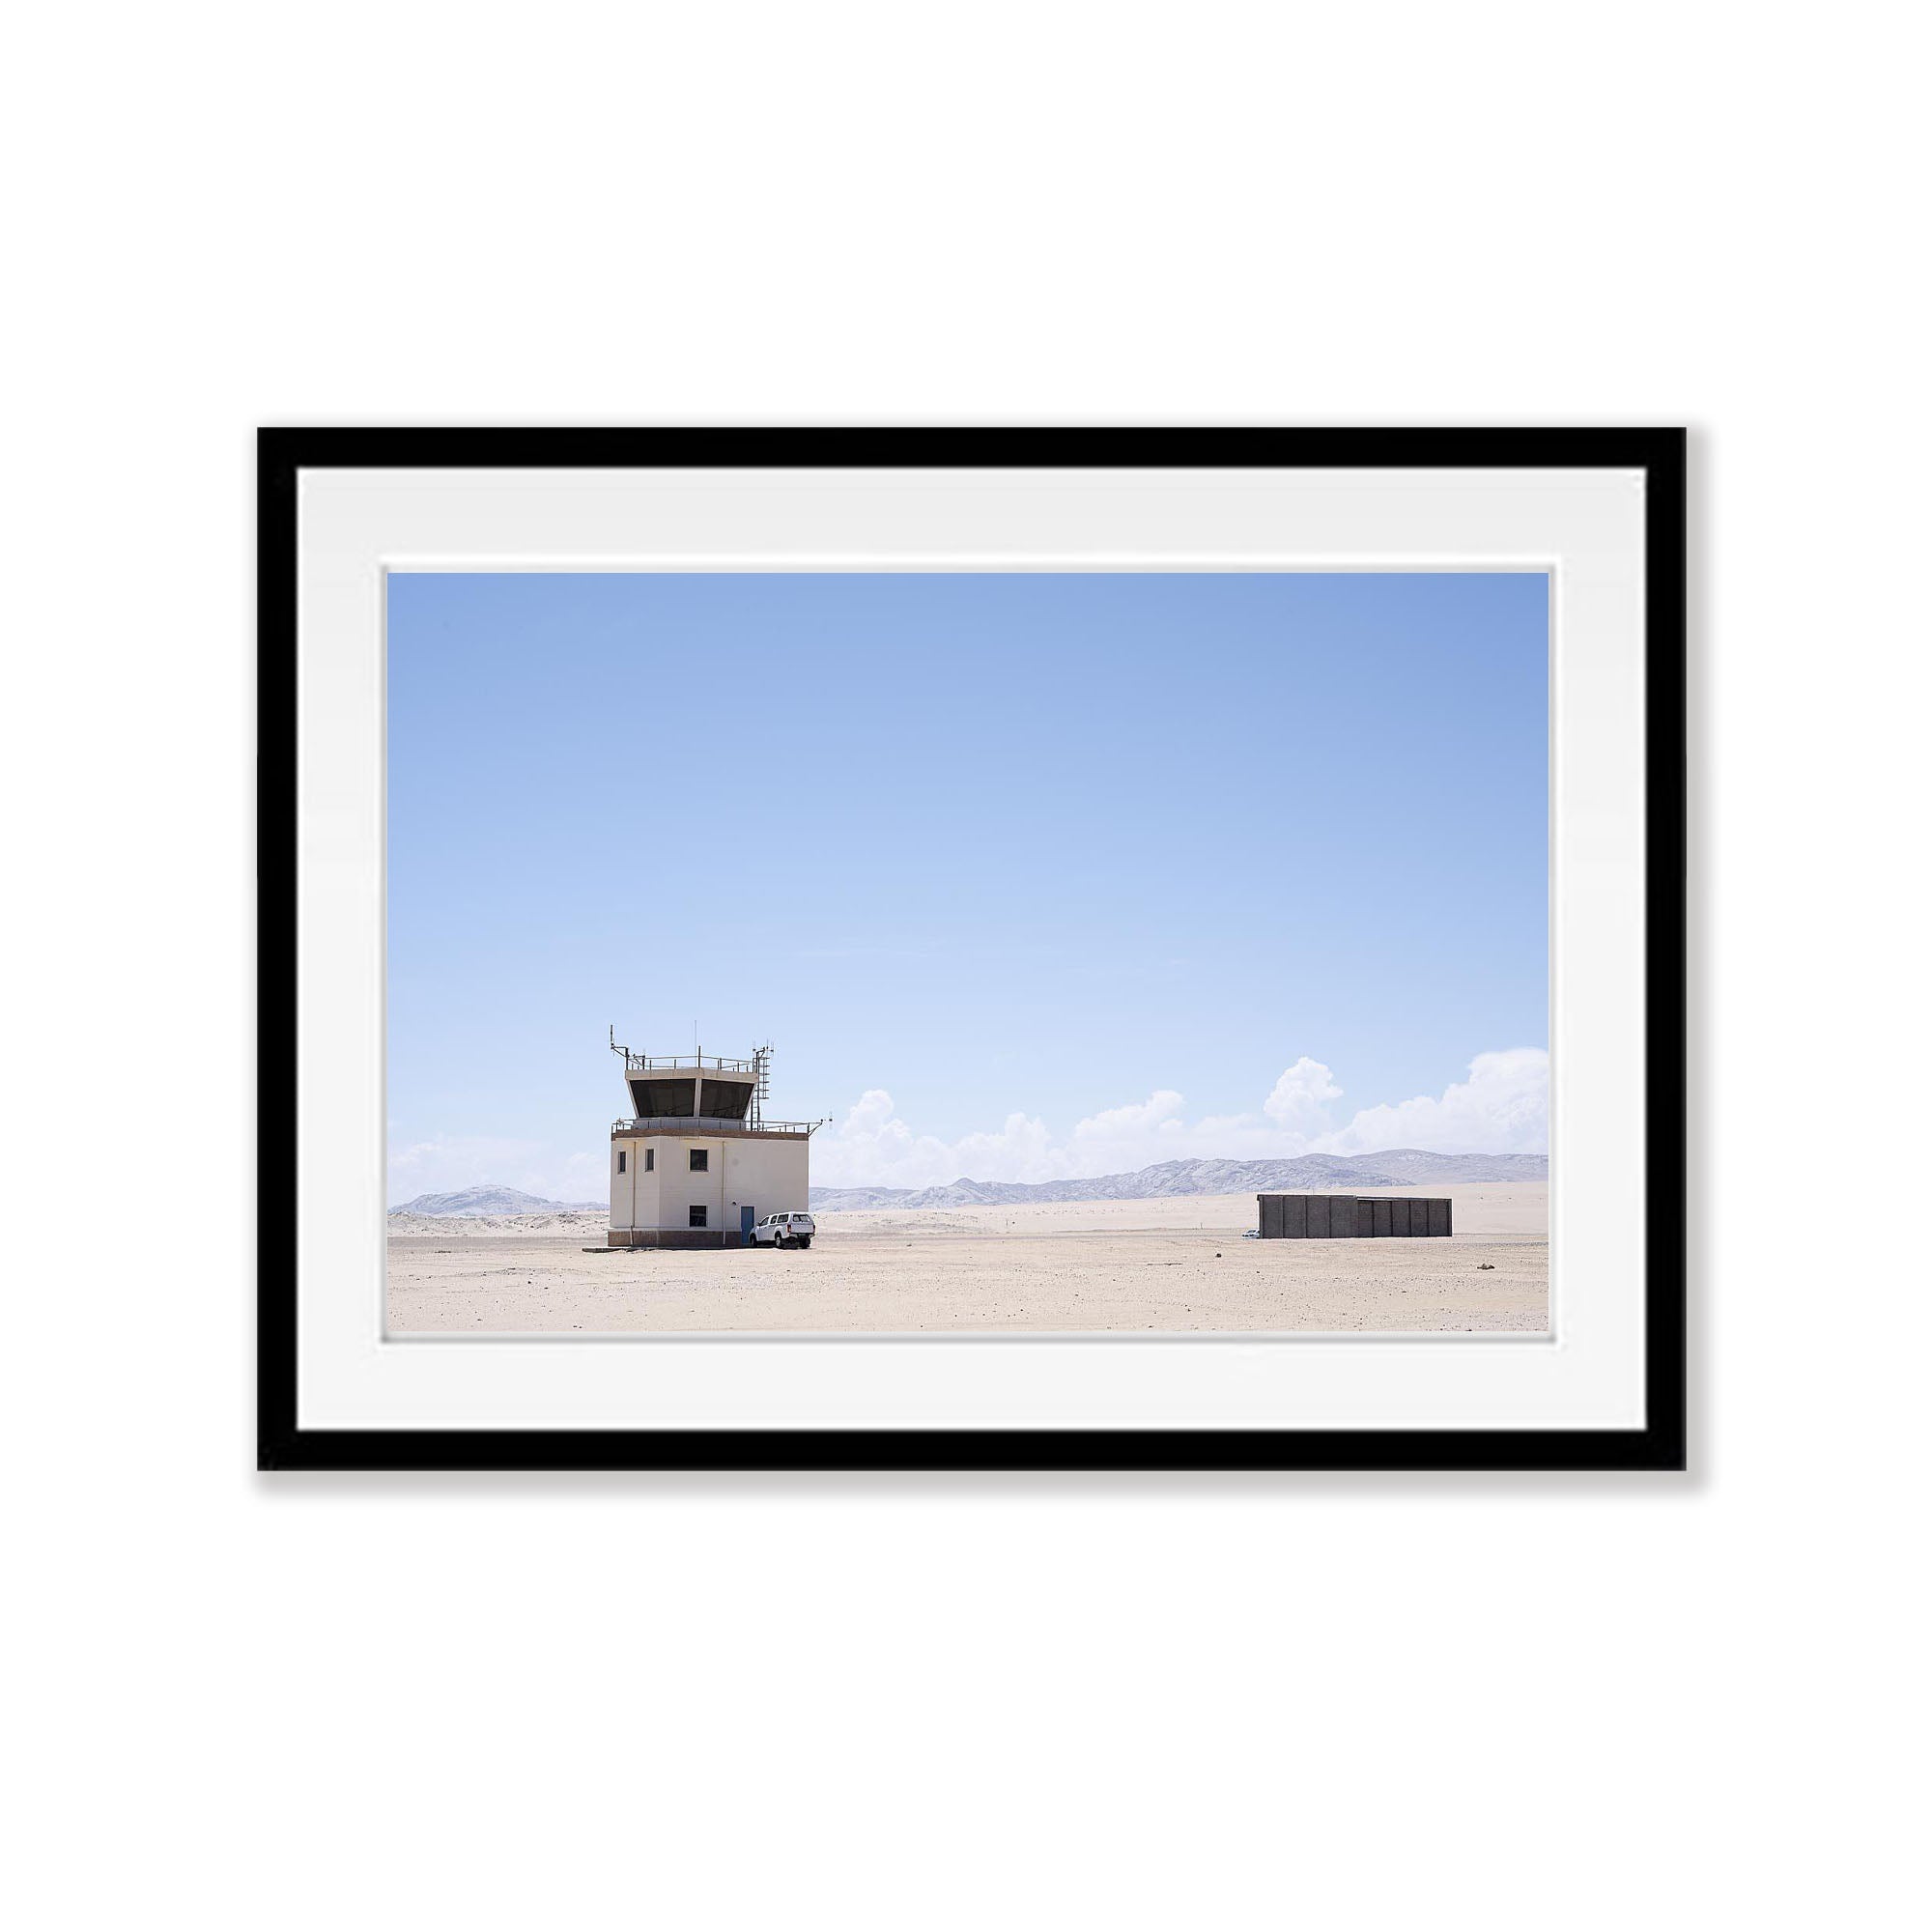 Airport Control Tower in the middle of nowhere, Namibia